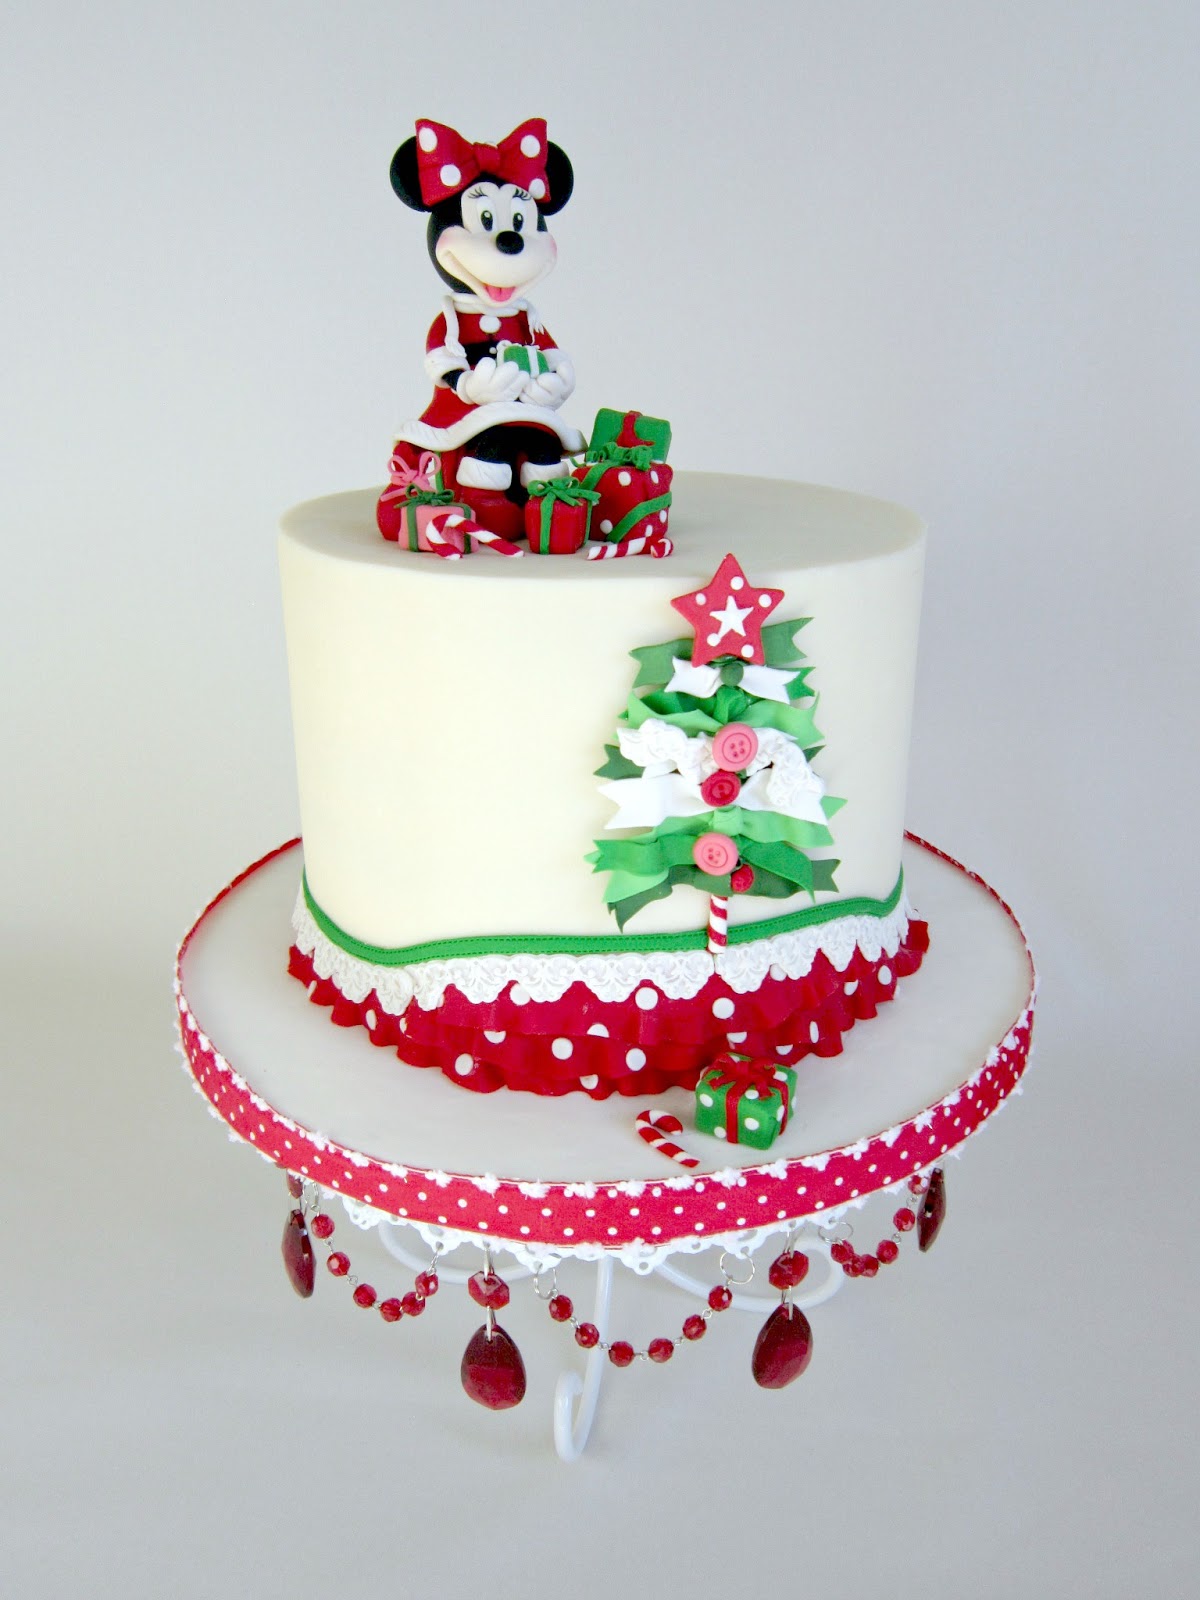 Delectable Cakes: Adorable Minnie Mouse 'Christmas' Birthday Cake